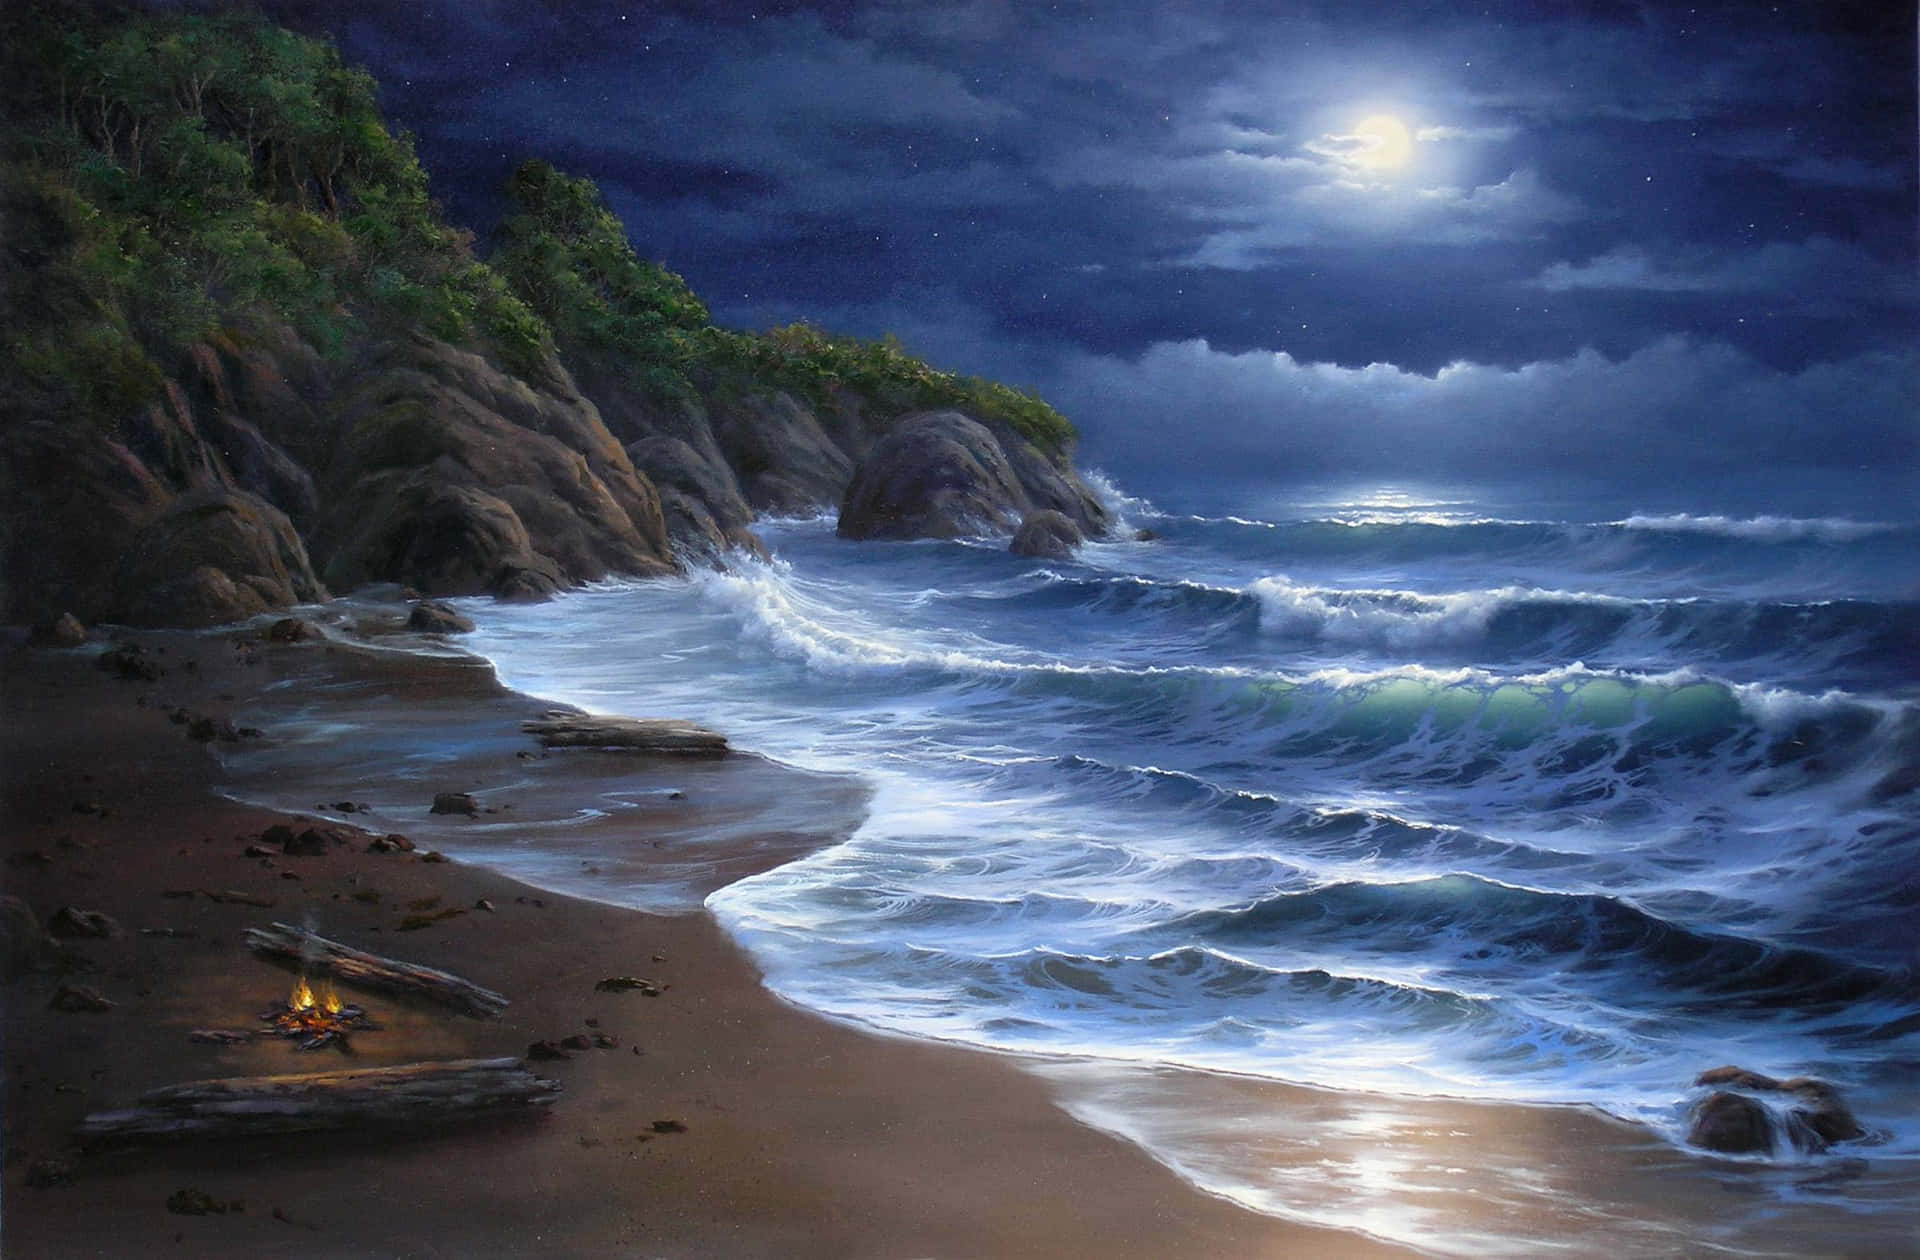 "The Moonlight Glistening on the Calm Waters of the Beach"